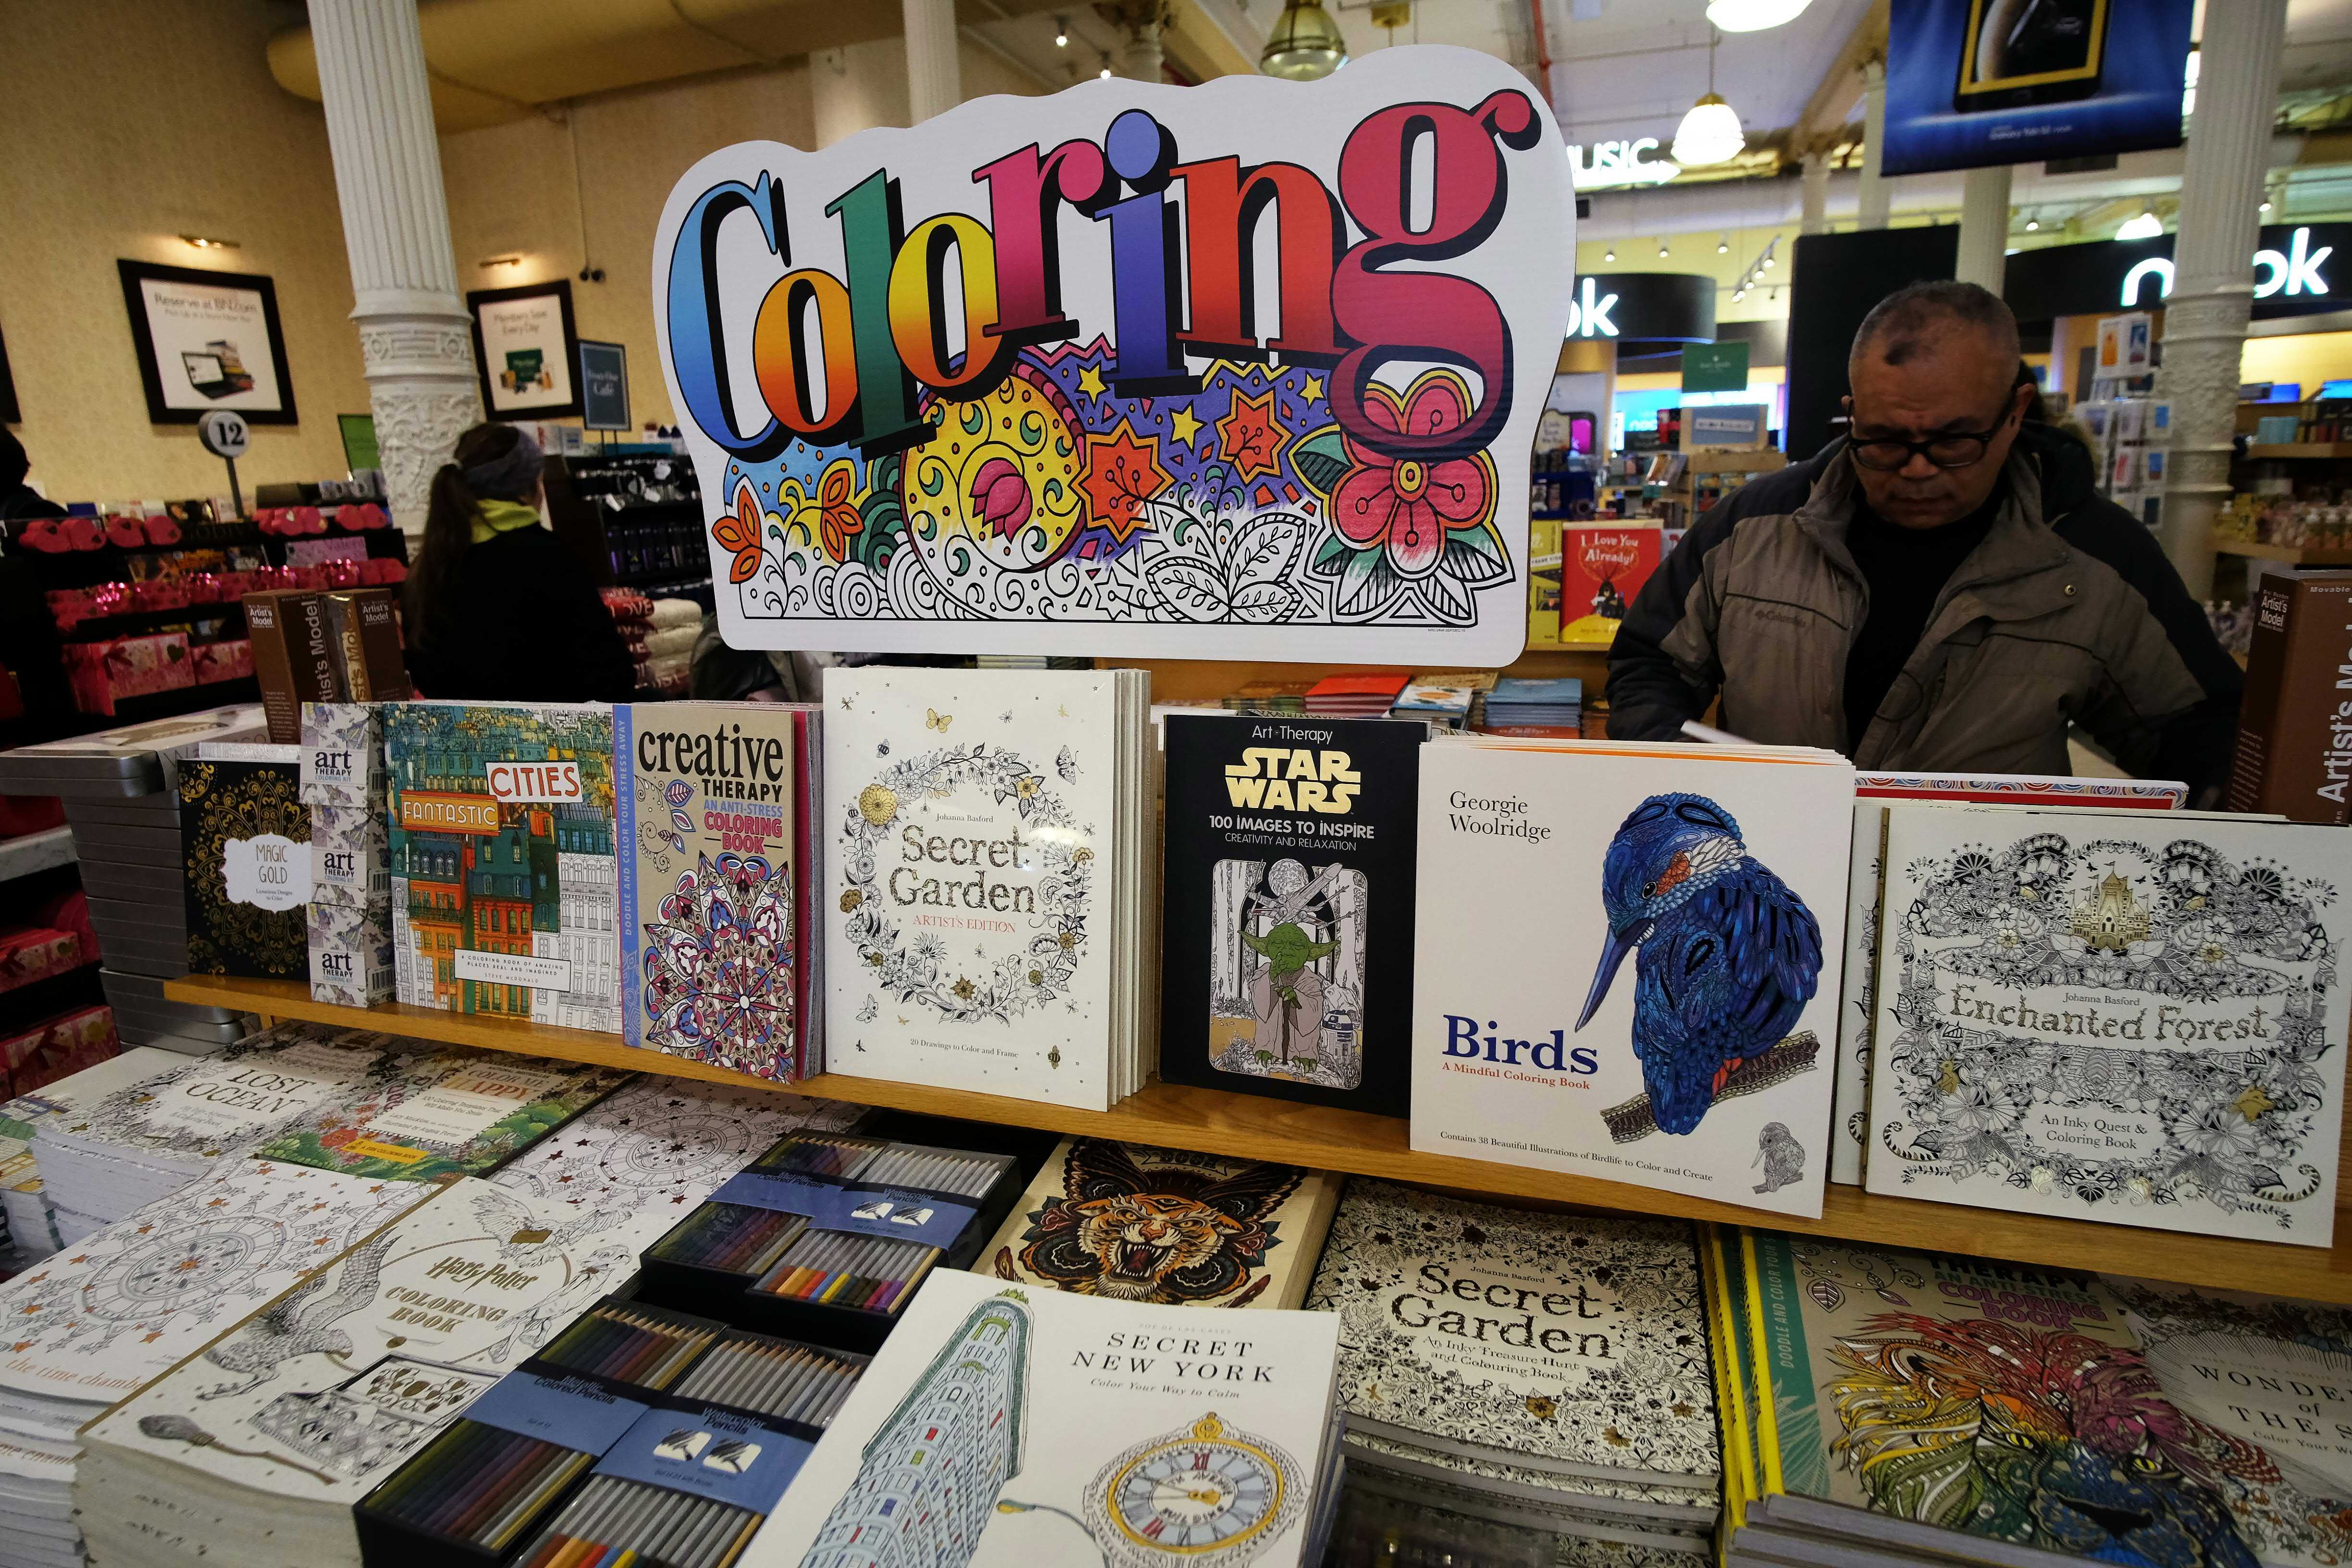 A man checks out coloring pencils next to adult coloring books at a Barnes and Nobel store in New York on January 15, 2016. (JEWEL SAMAD&mdash;AFP/Getty Images)